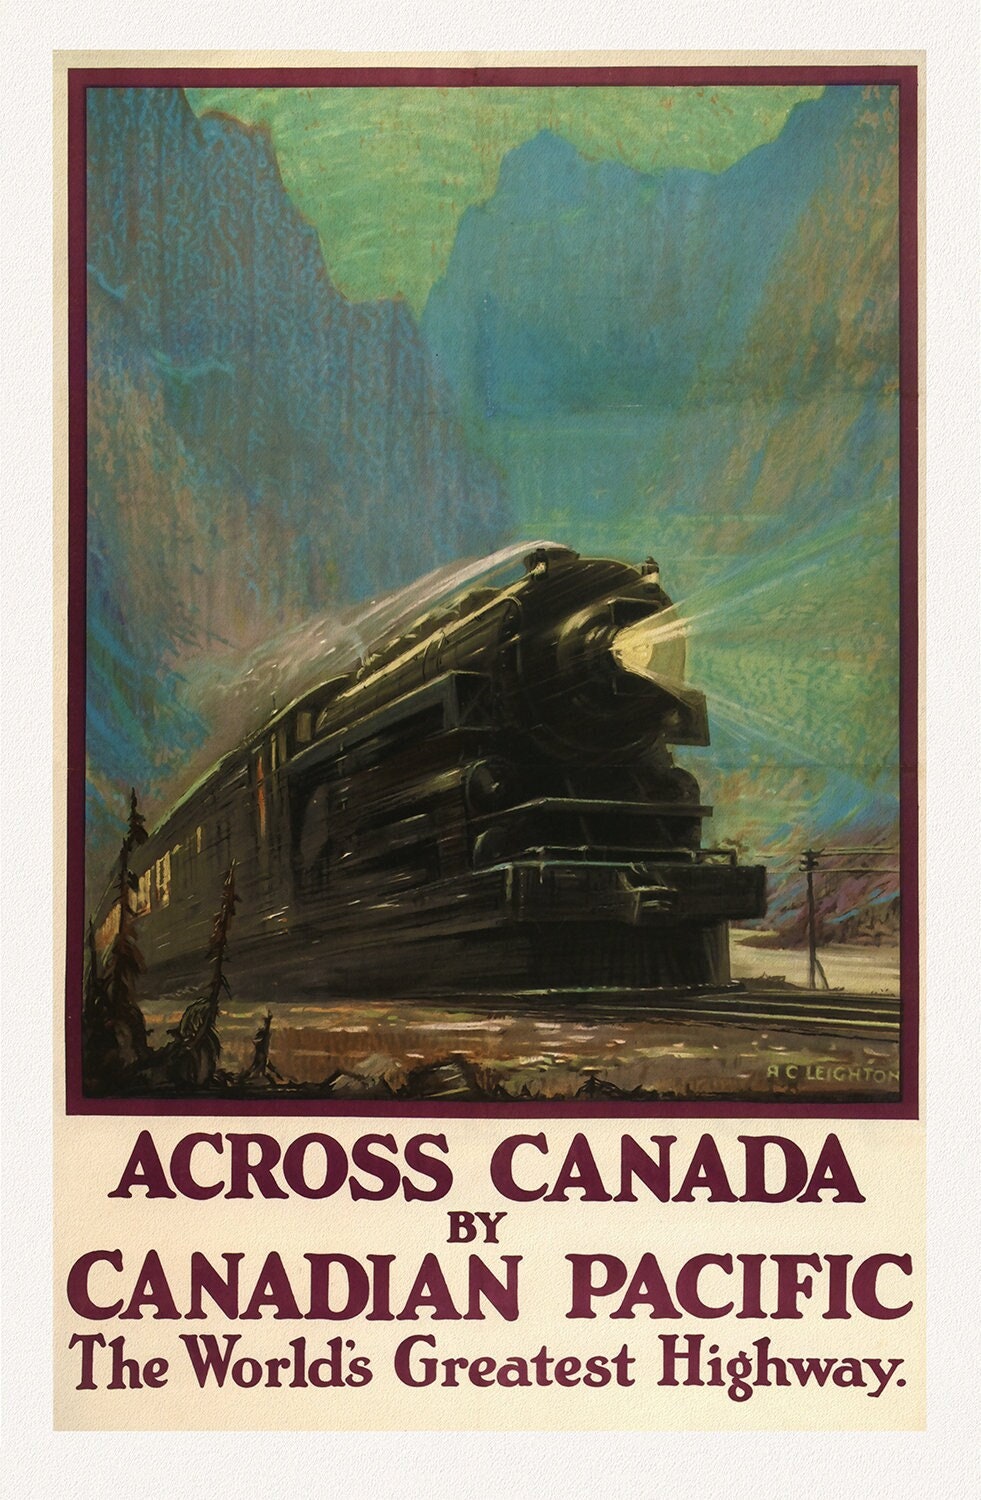 Across Canada, with Canadian Pacific, 1930, travel poster on heavy cotton canvas, 50 x 70 cm, 20 x 25" approx.